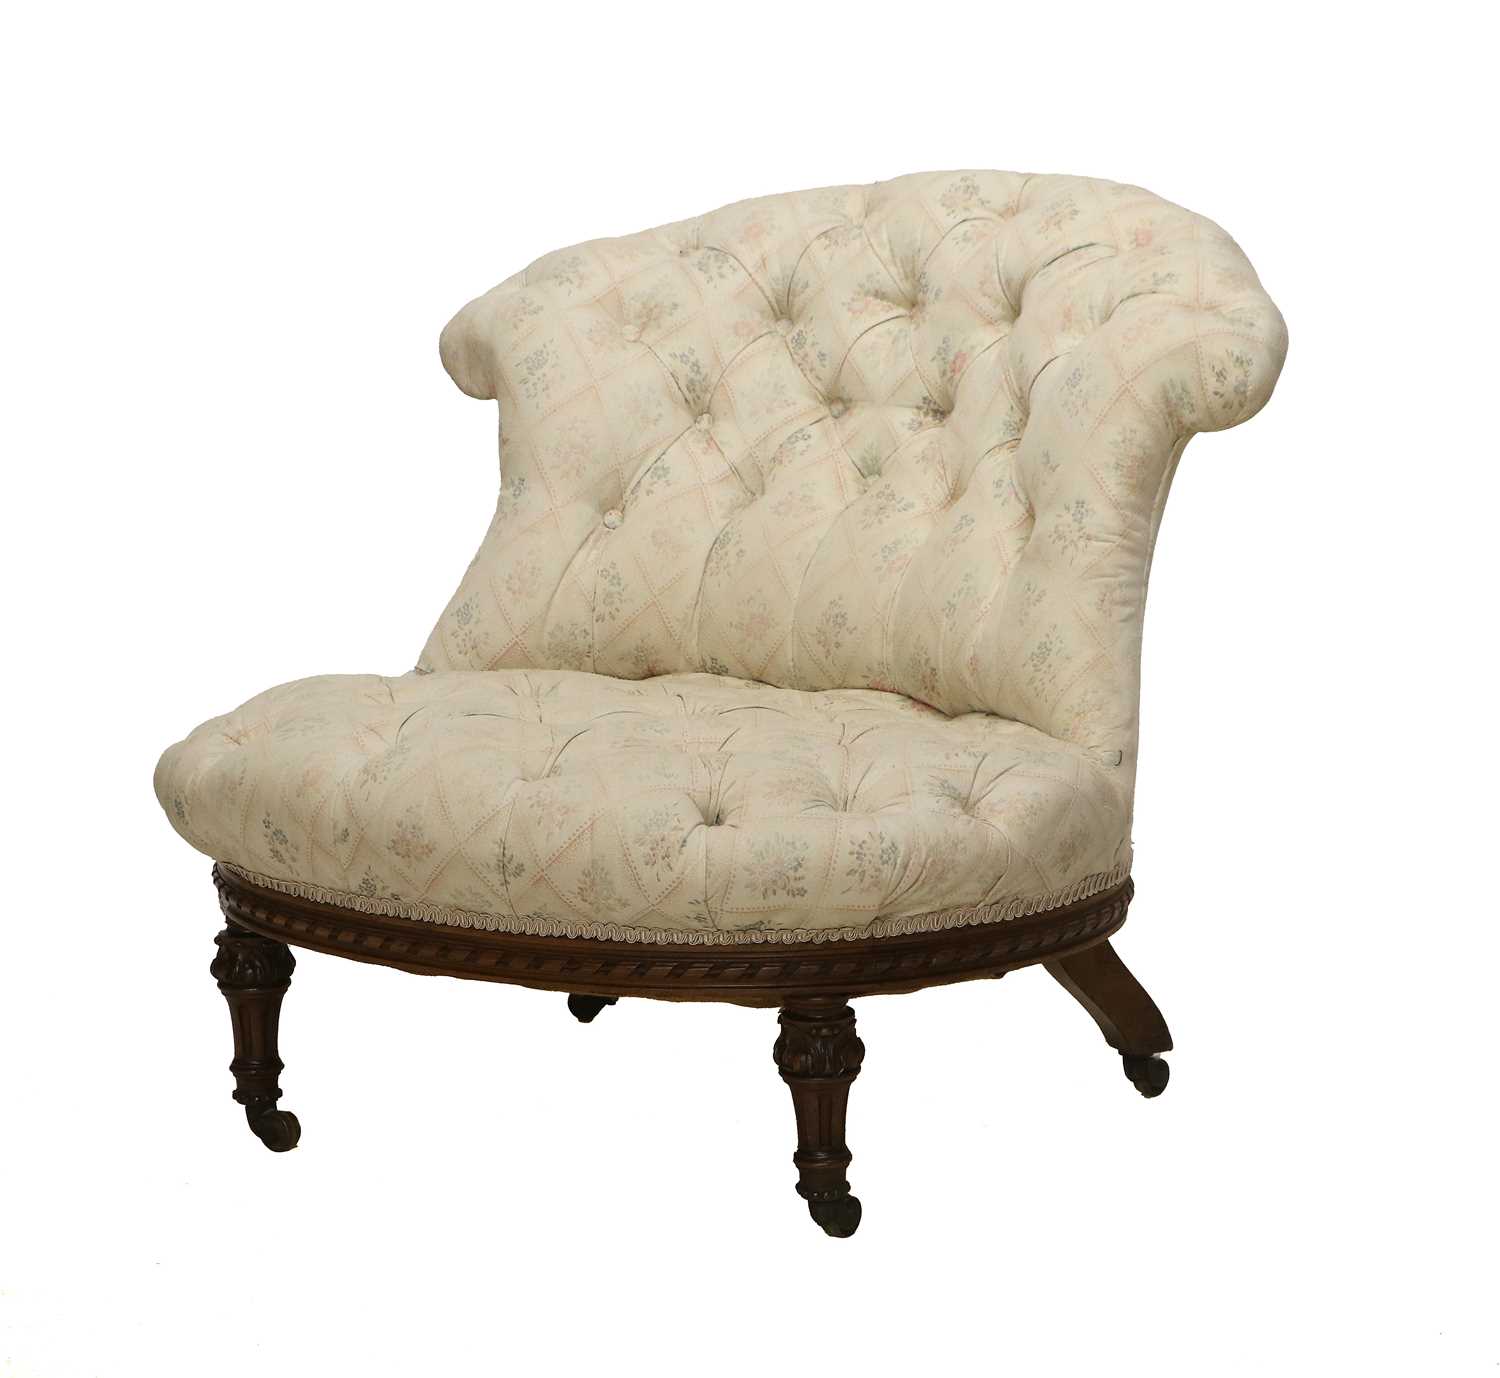 Holland & Sons: A Victorian Carved Walnut Nursing Chair, late 19th century, recovered in cream,